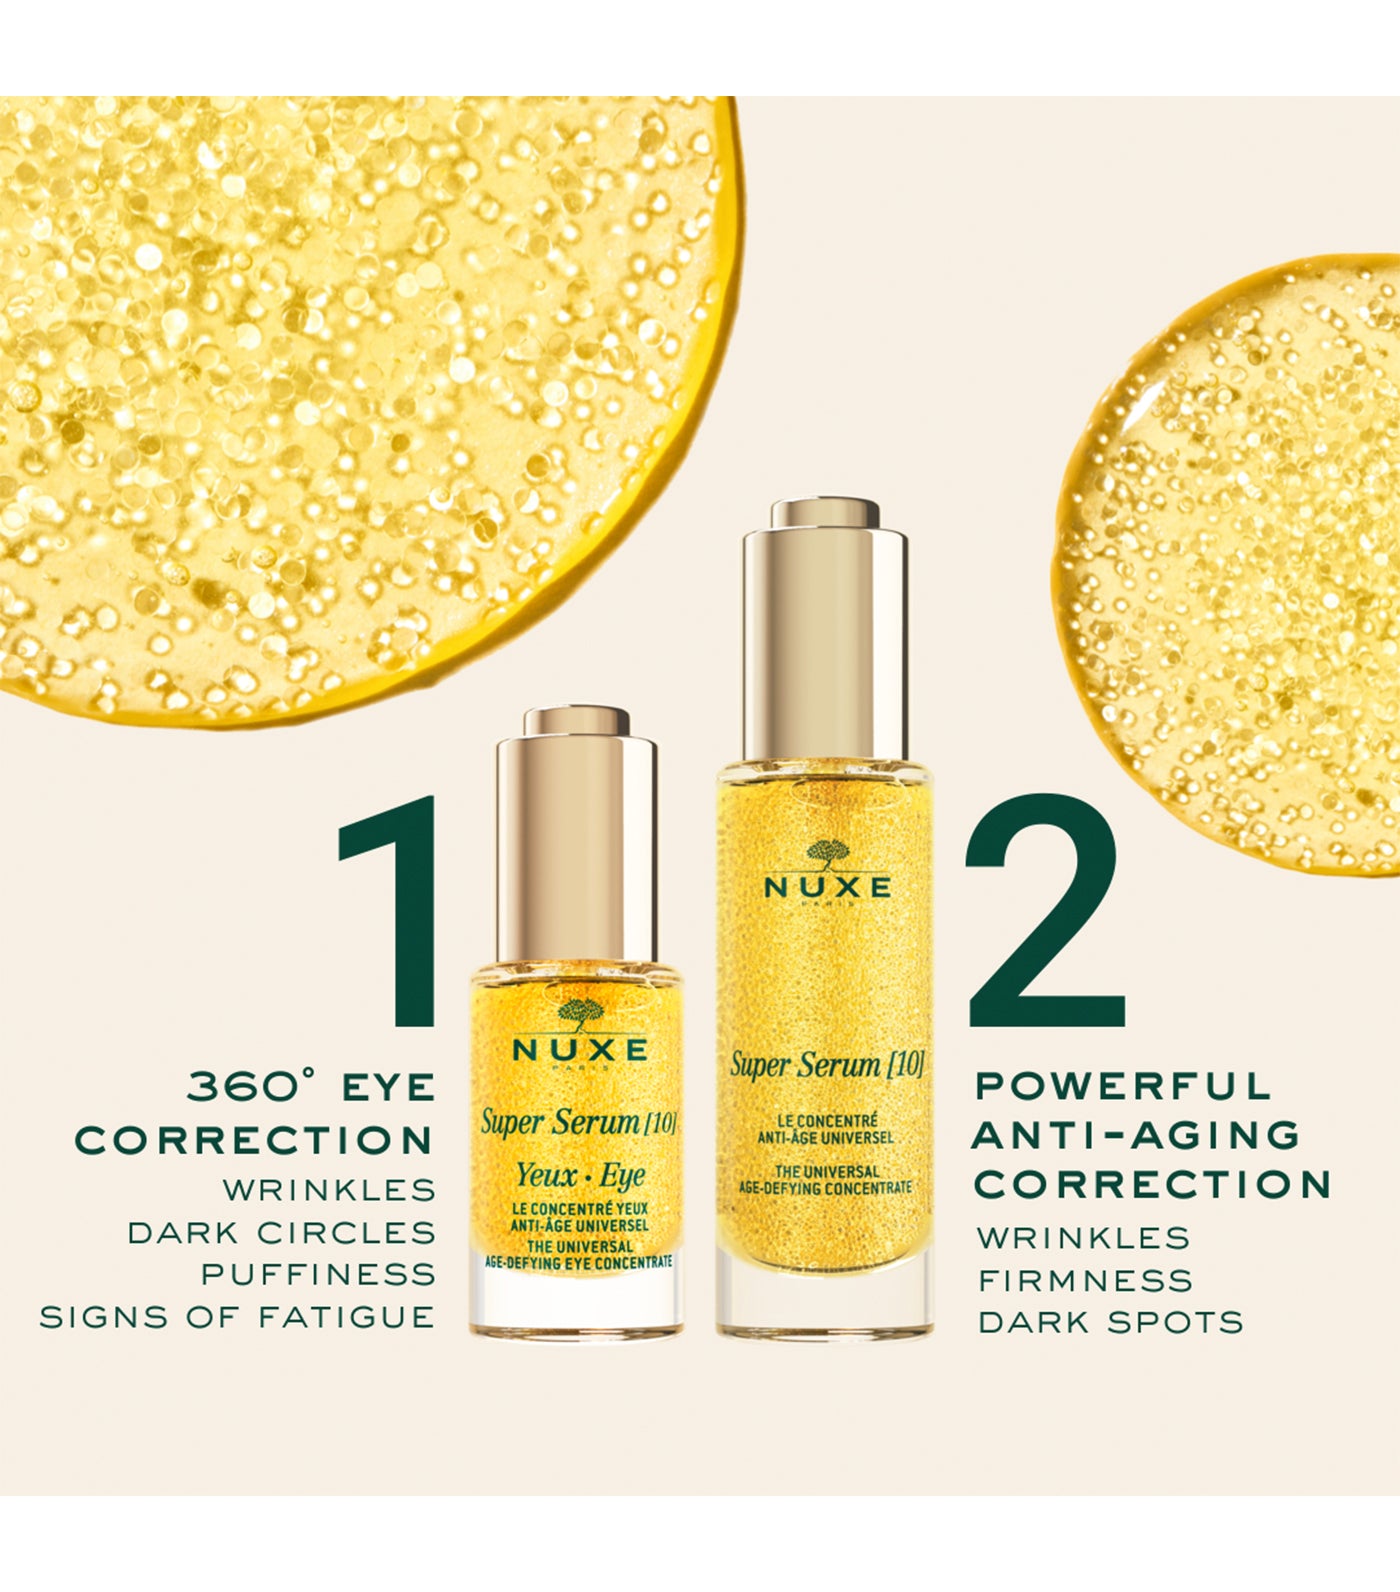 Super Serum [10] Eye, The Universal Age-defying Eye Concentrate